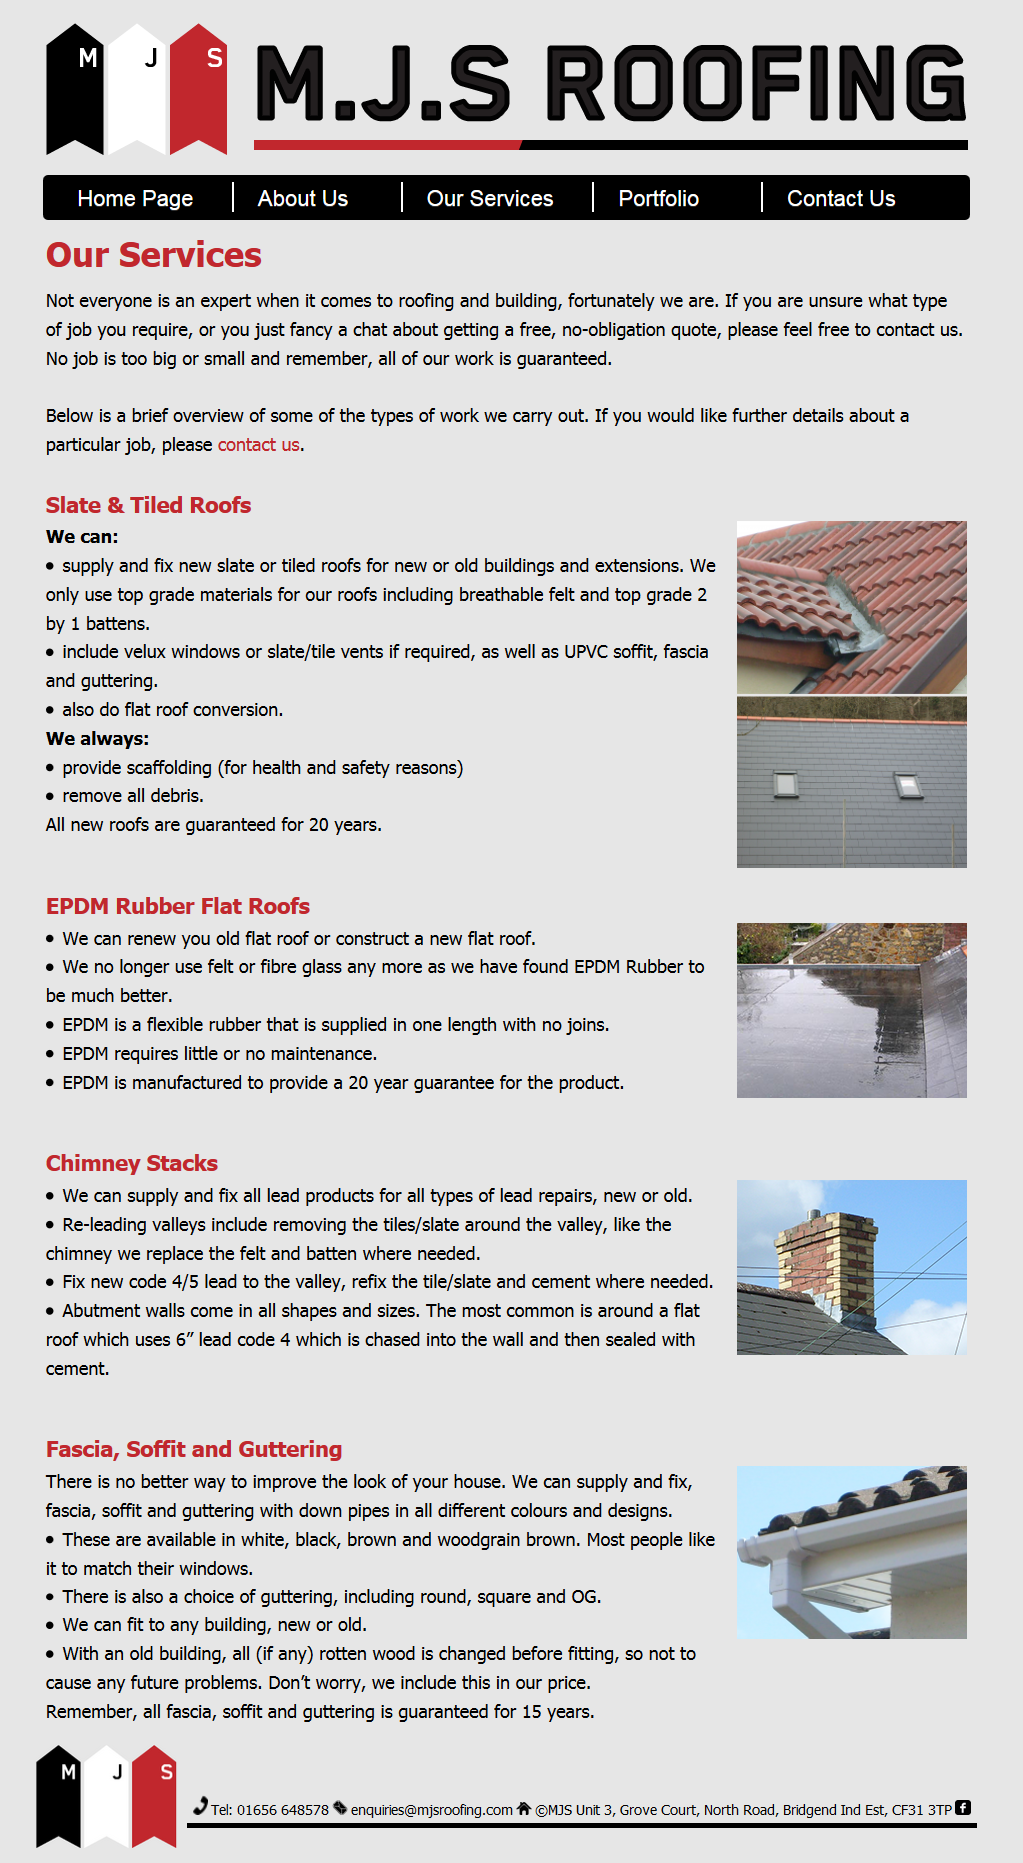 An image from the MJS Roofing website